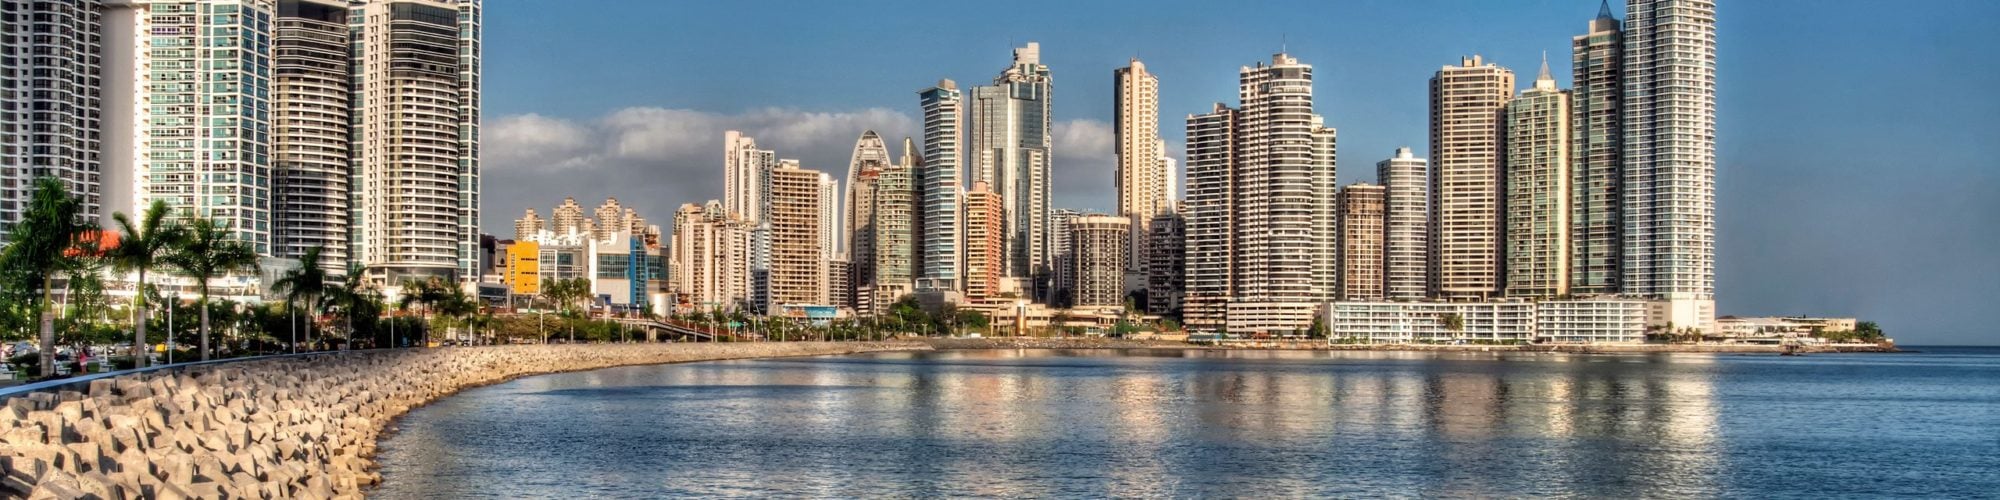 Panama City travel agents packages deals